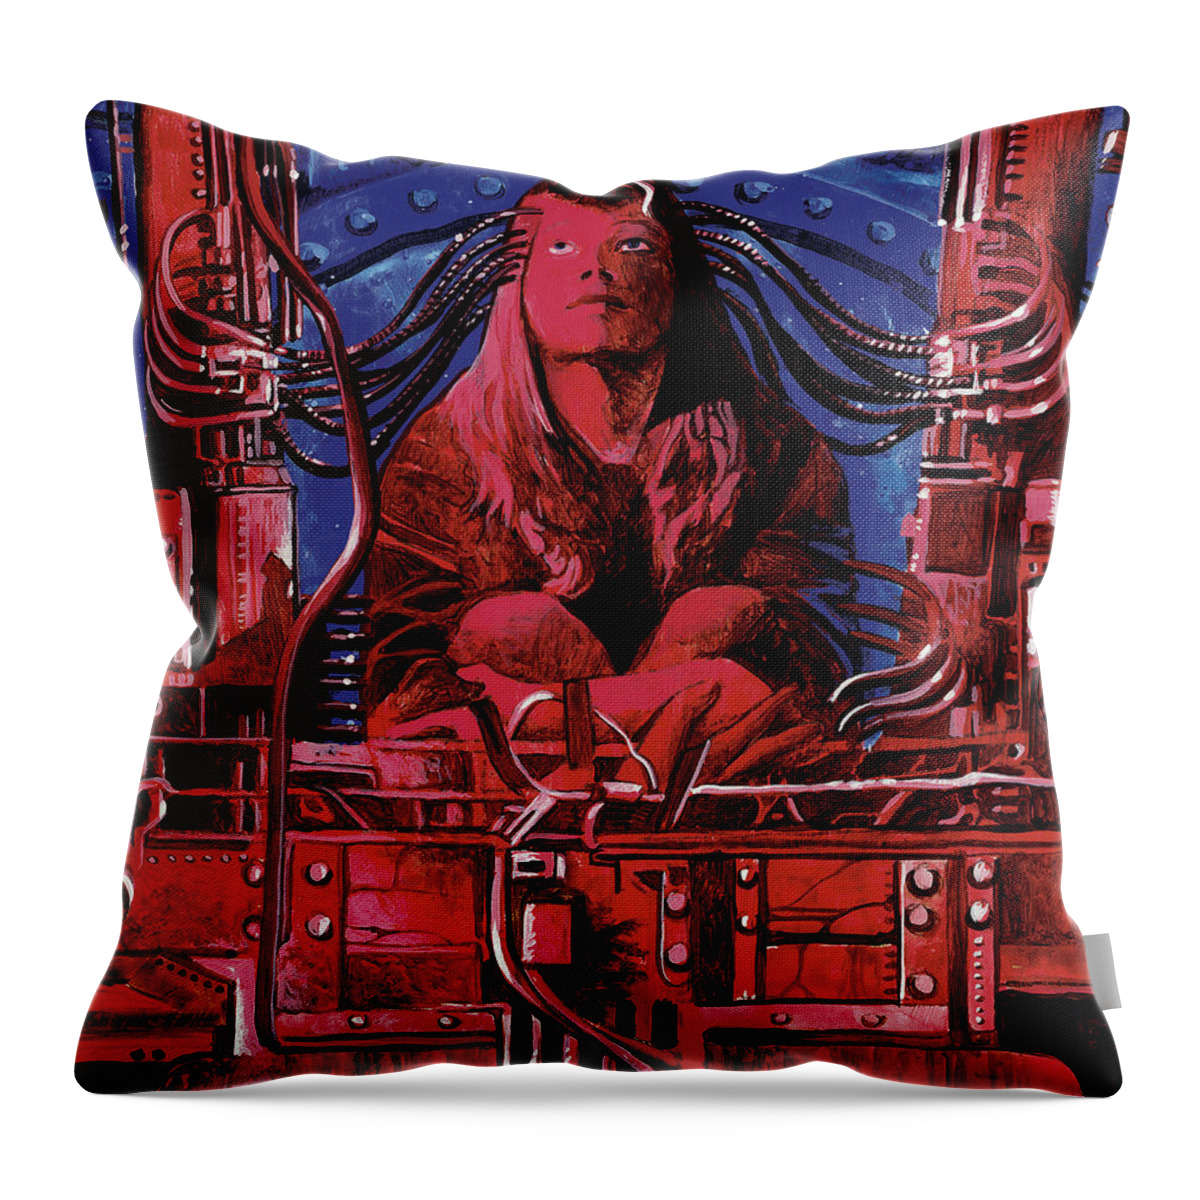 Heavy Metal Throw Pillow featuring the painting Abstract Evolution by Sv Bell